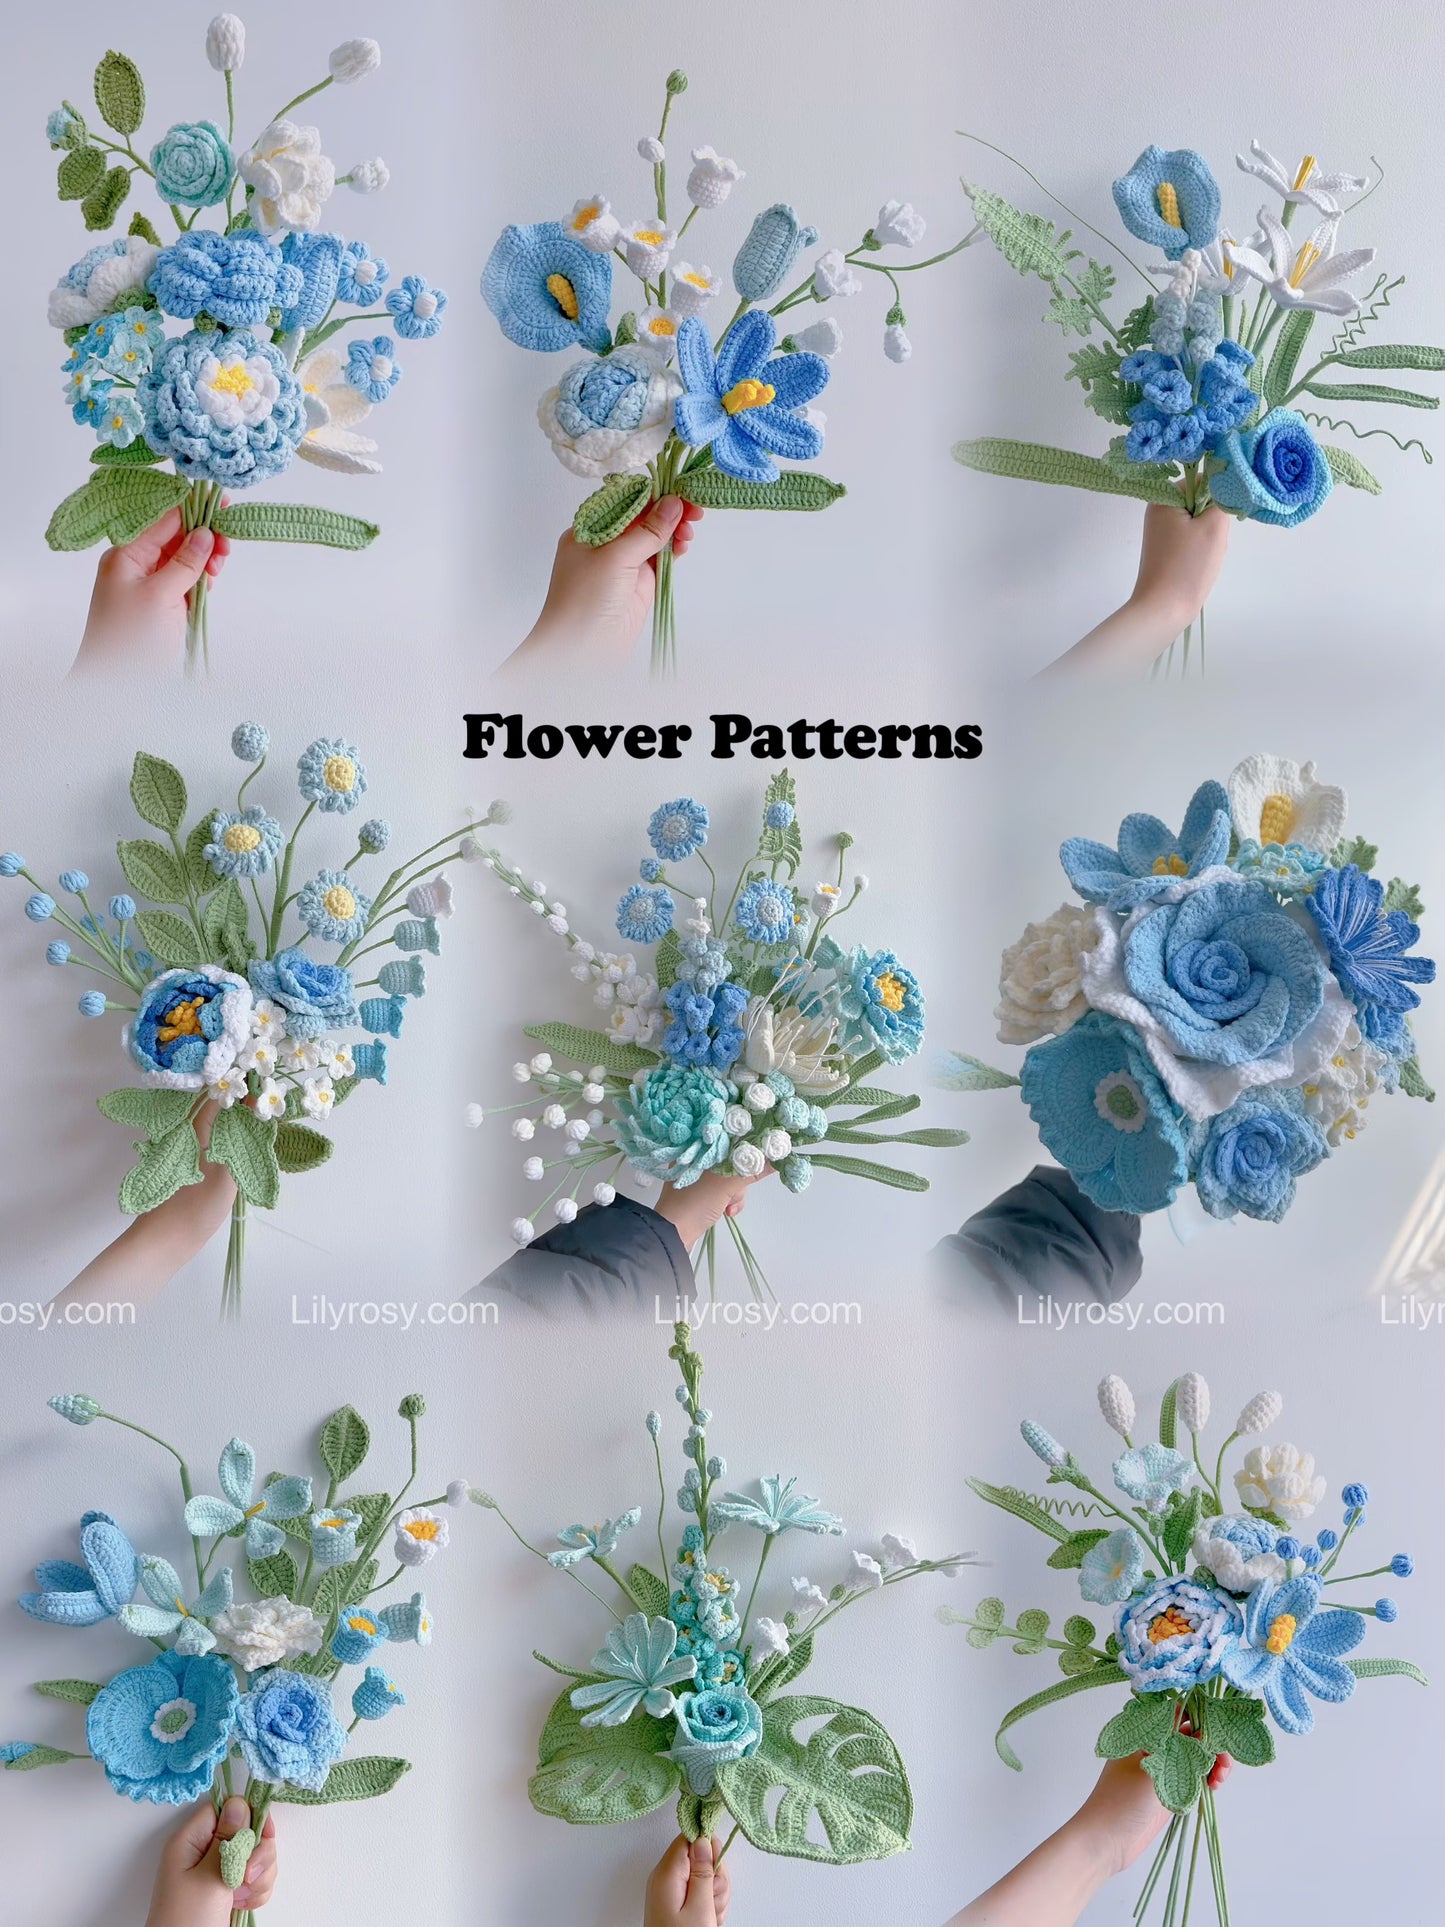 Lilyrosy 100 kinds of crochet flowers patterns with step by step video tutorial, US Terms